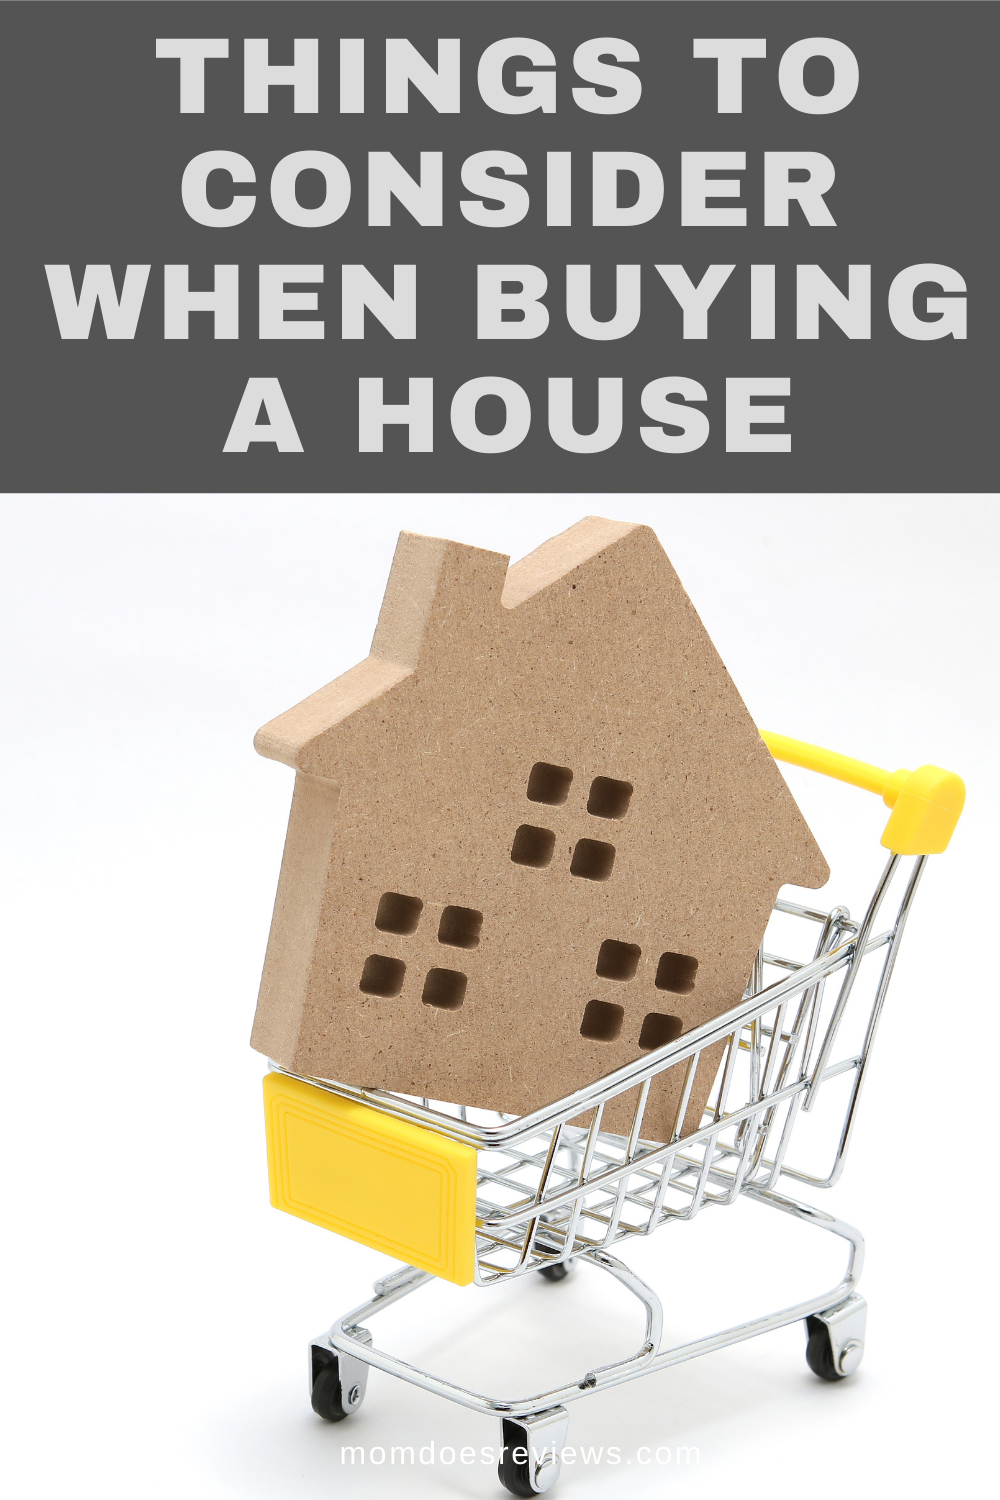 Things to Consider When Buying a House